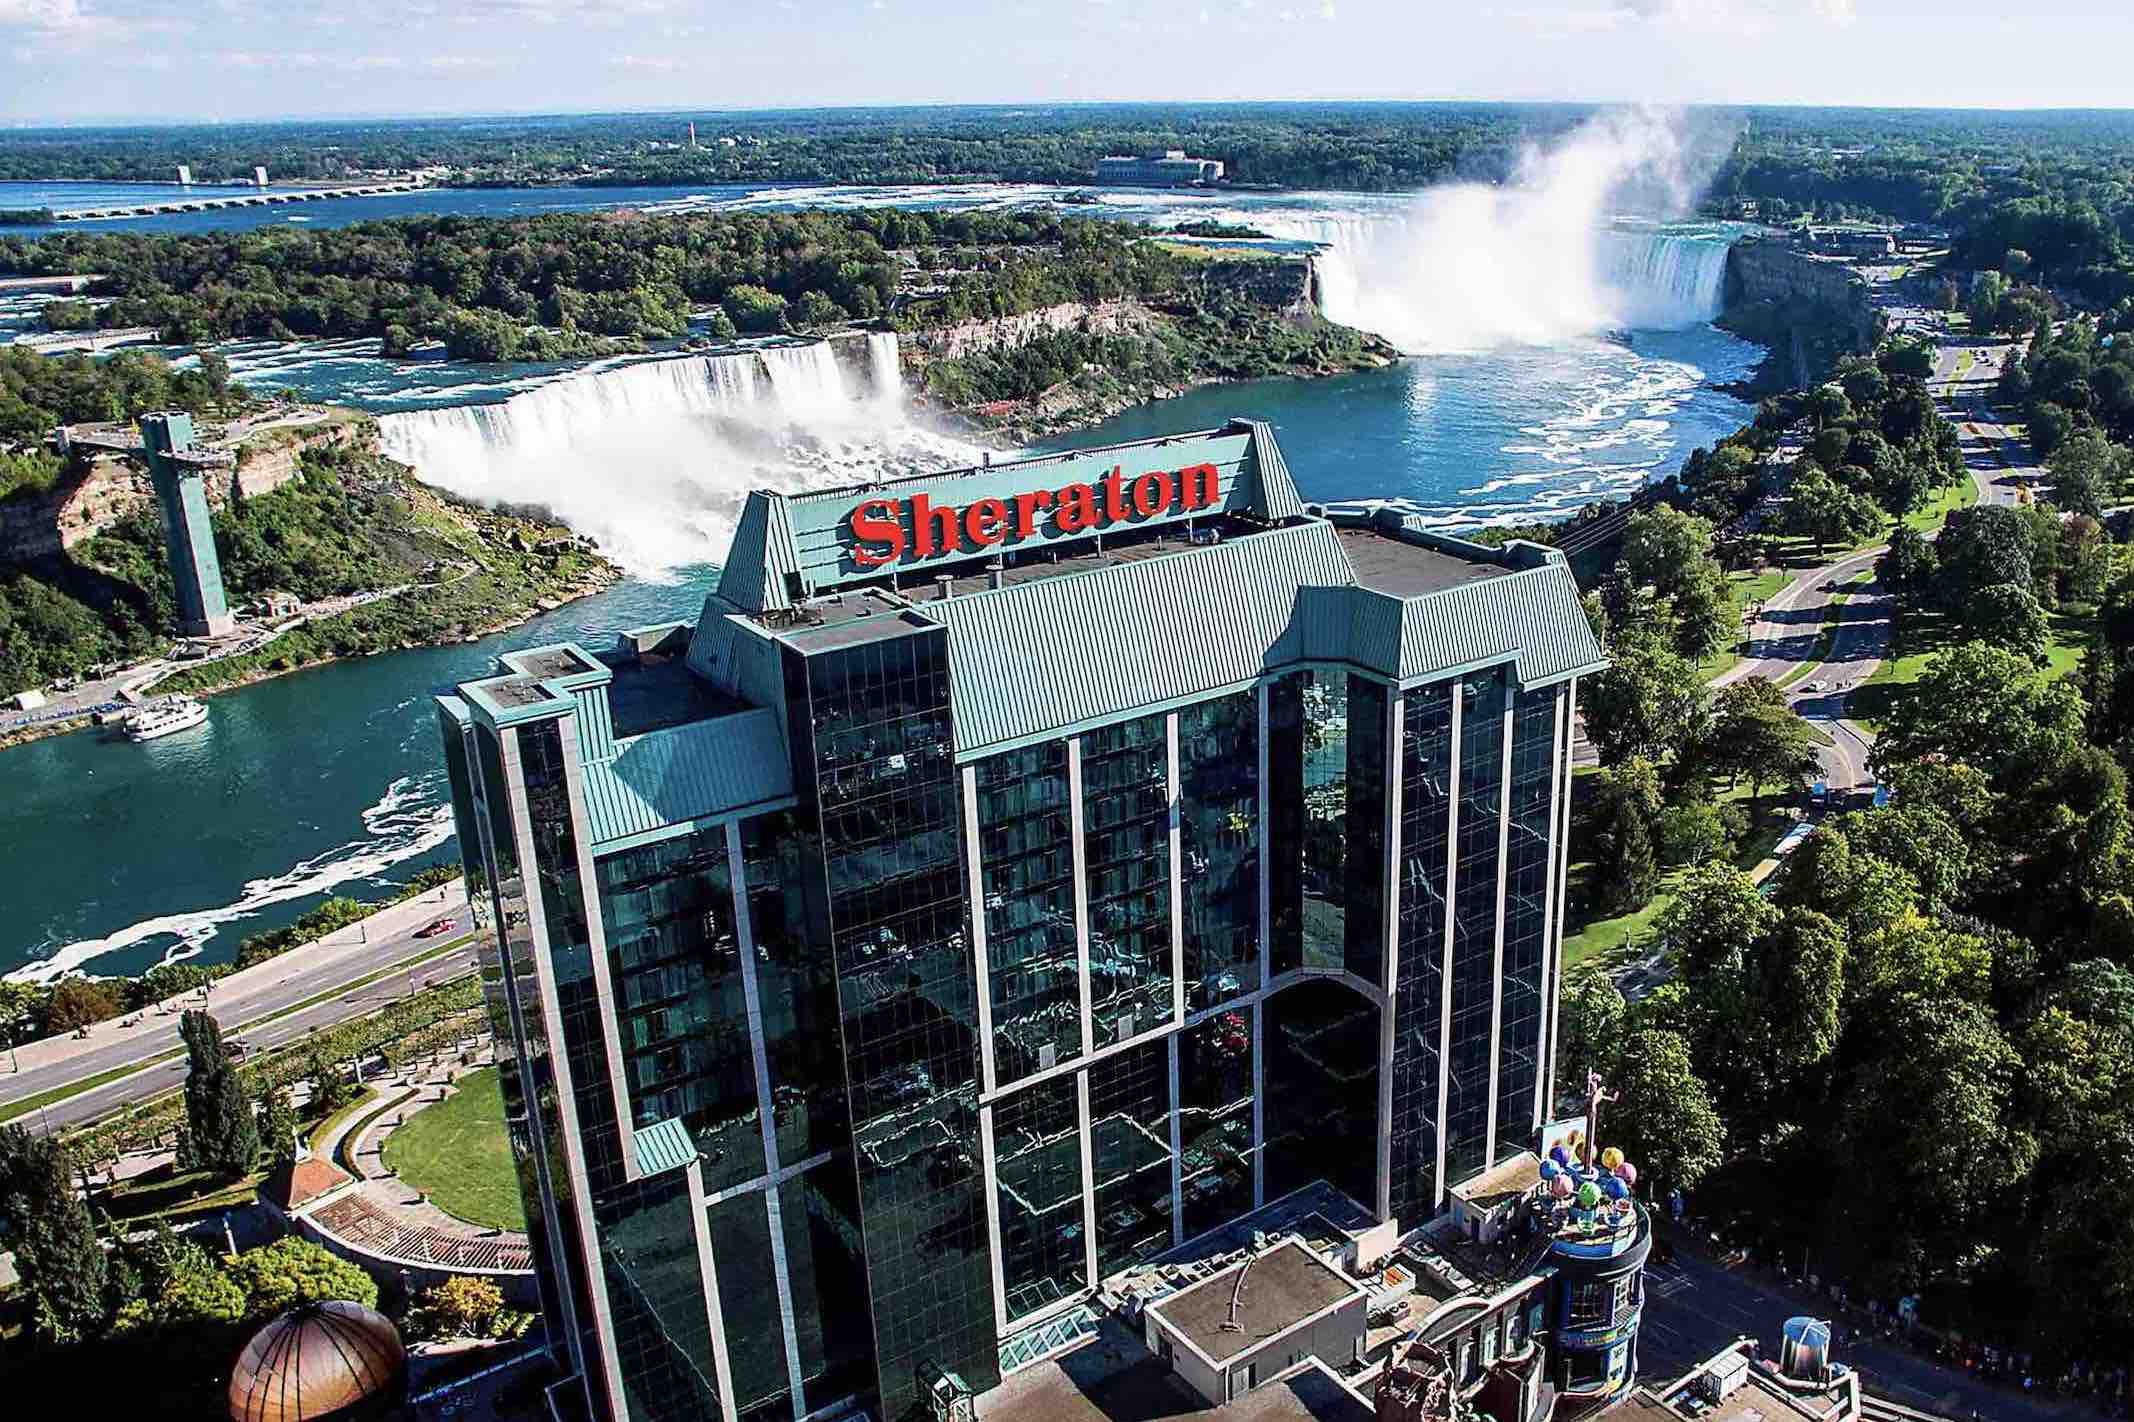 Sheraton on the Falls Hotel aerial view of luxury hotels in niagara falls with waterfalls in background